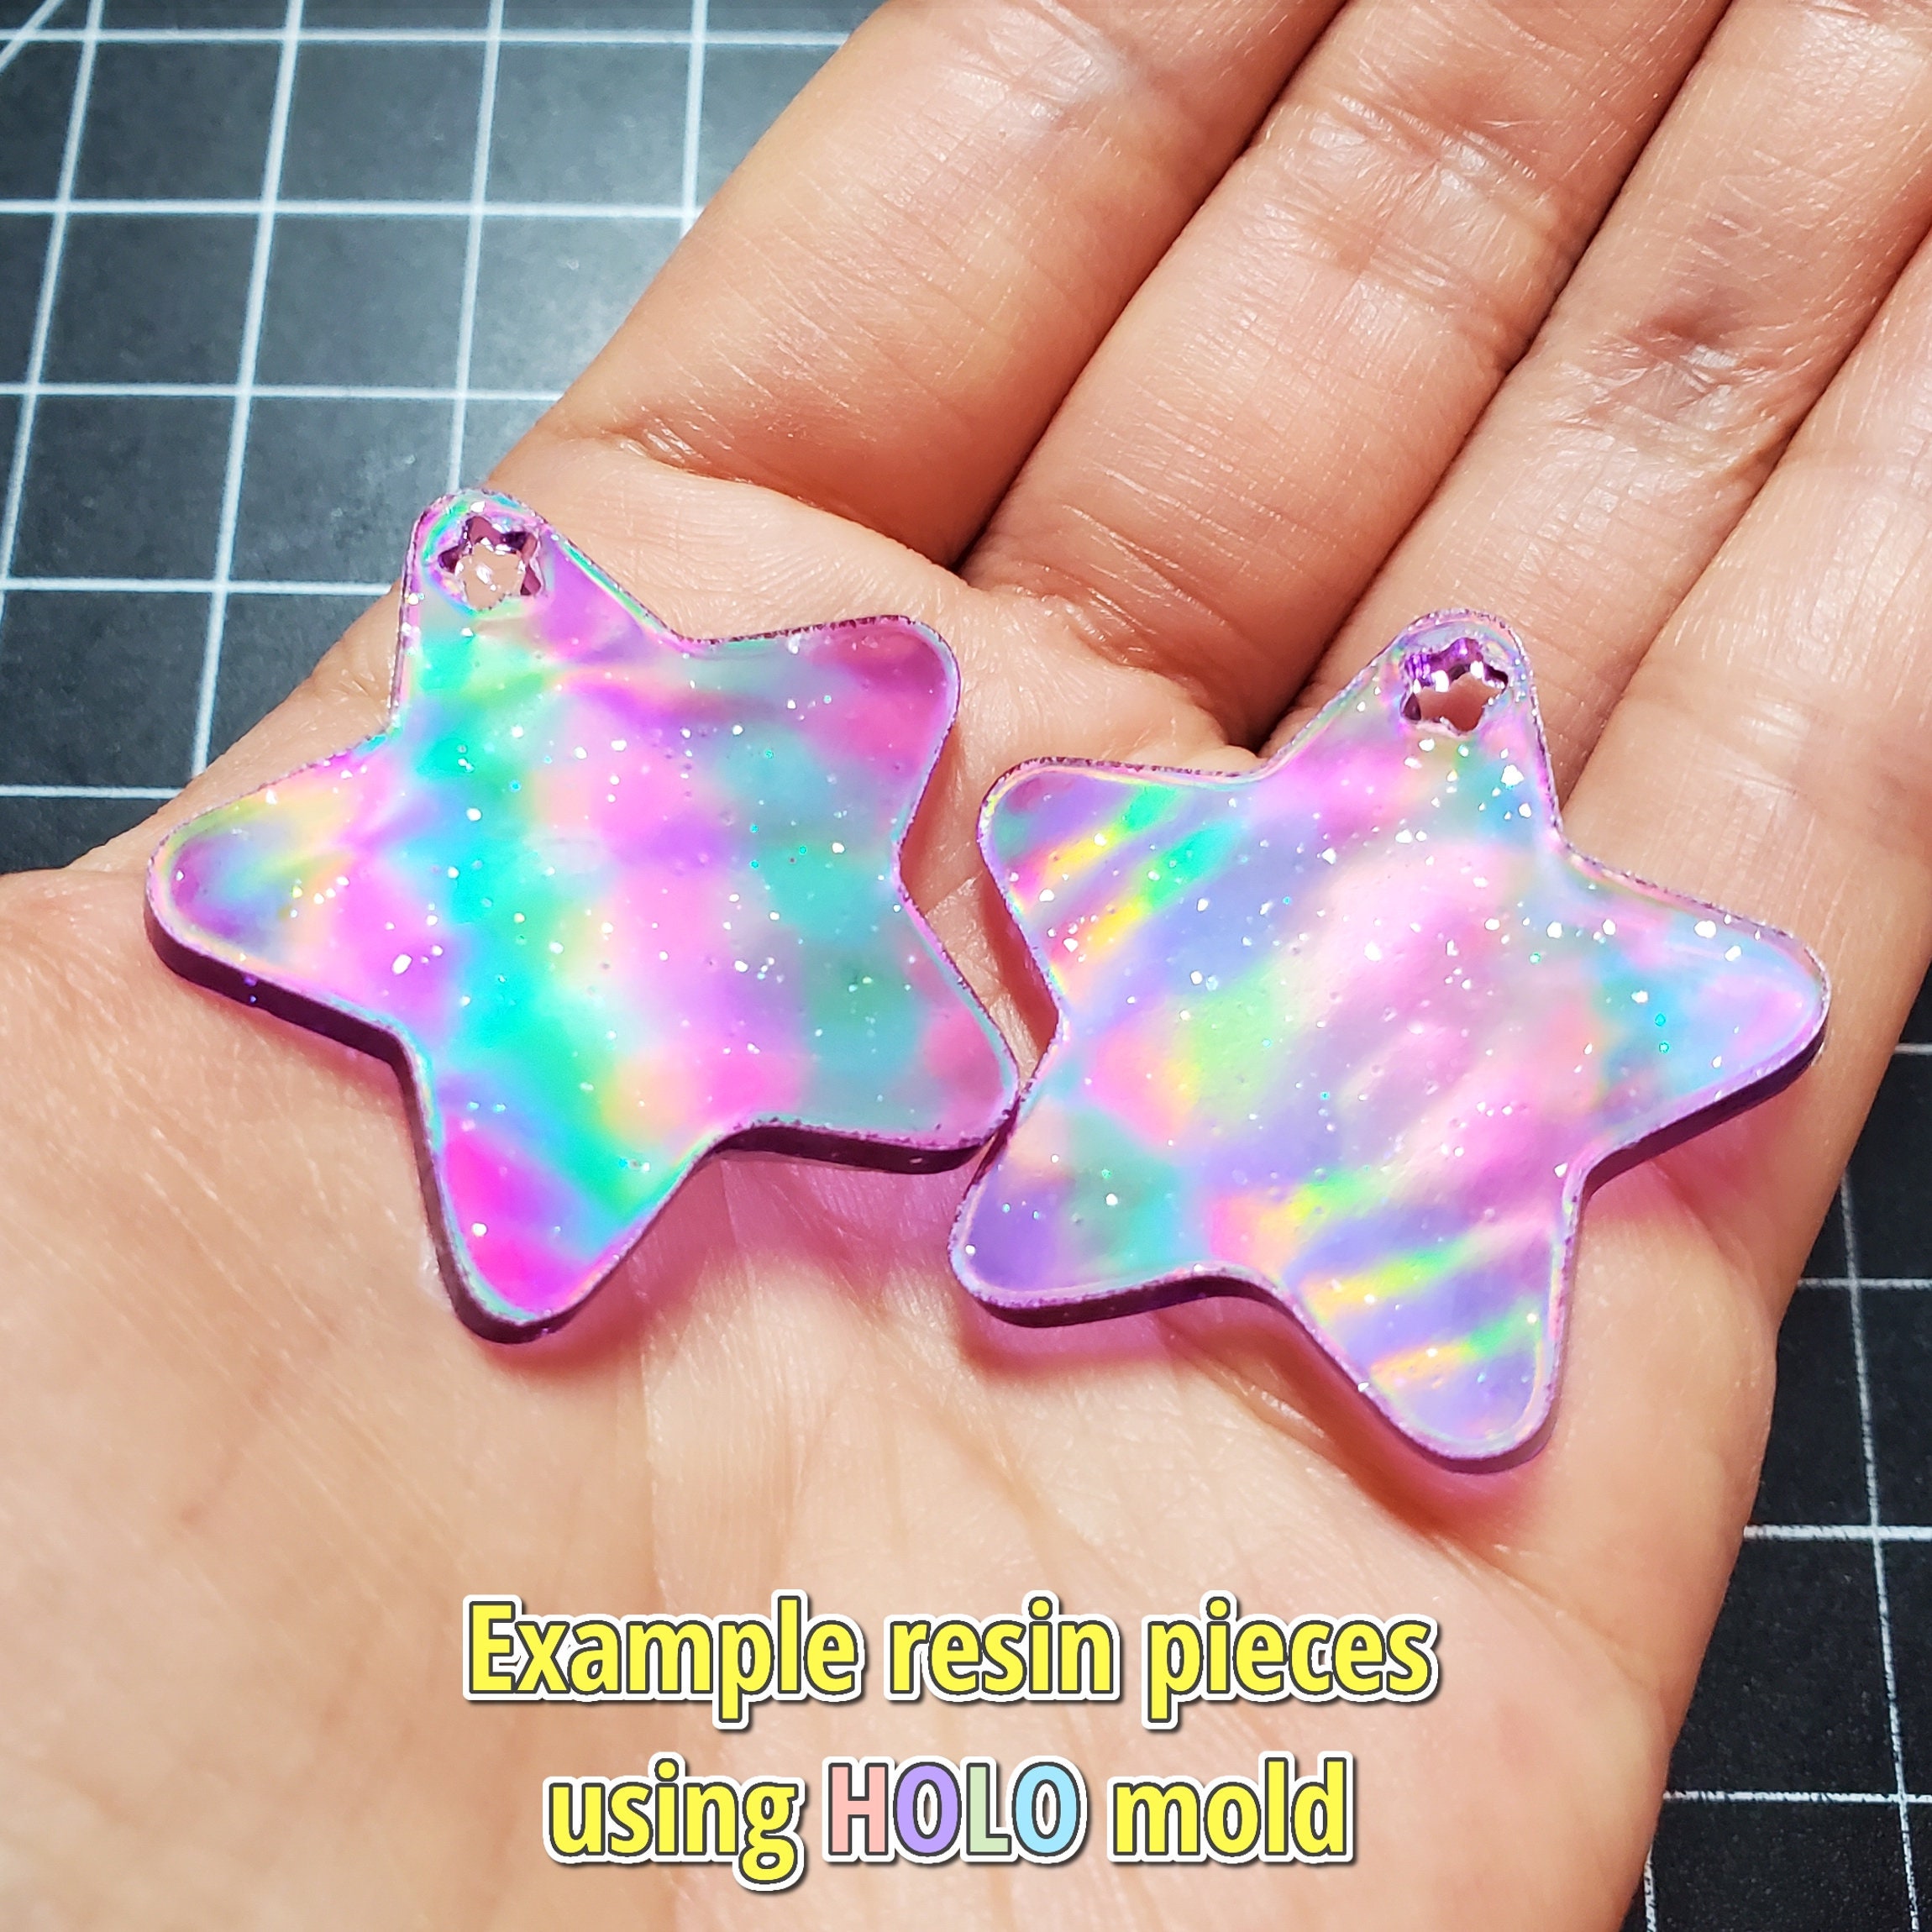 Juli Art Studio Uses Mold Star™ Series Platinum Silicone To Create  One-Of-A-Kind Holographic Molds